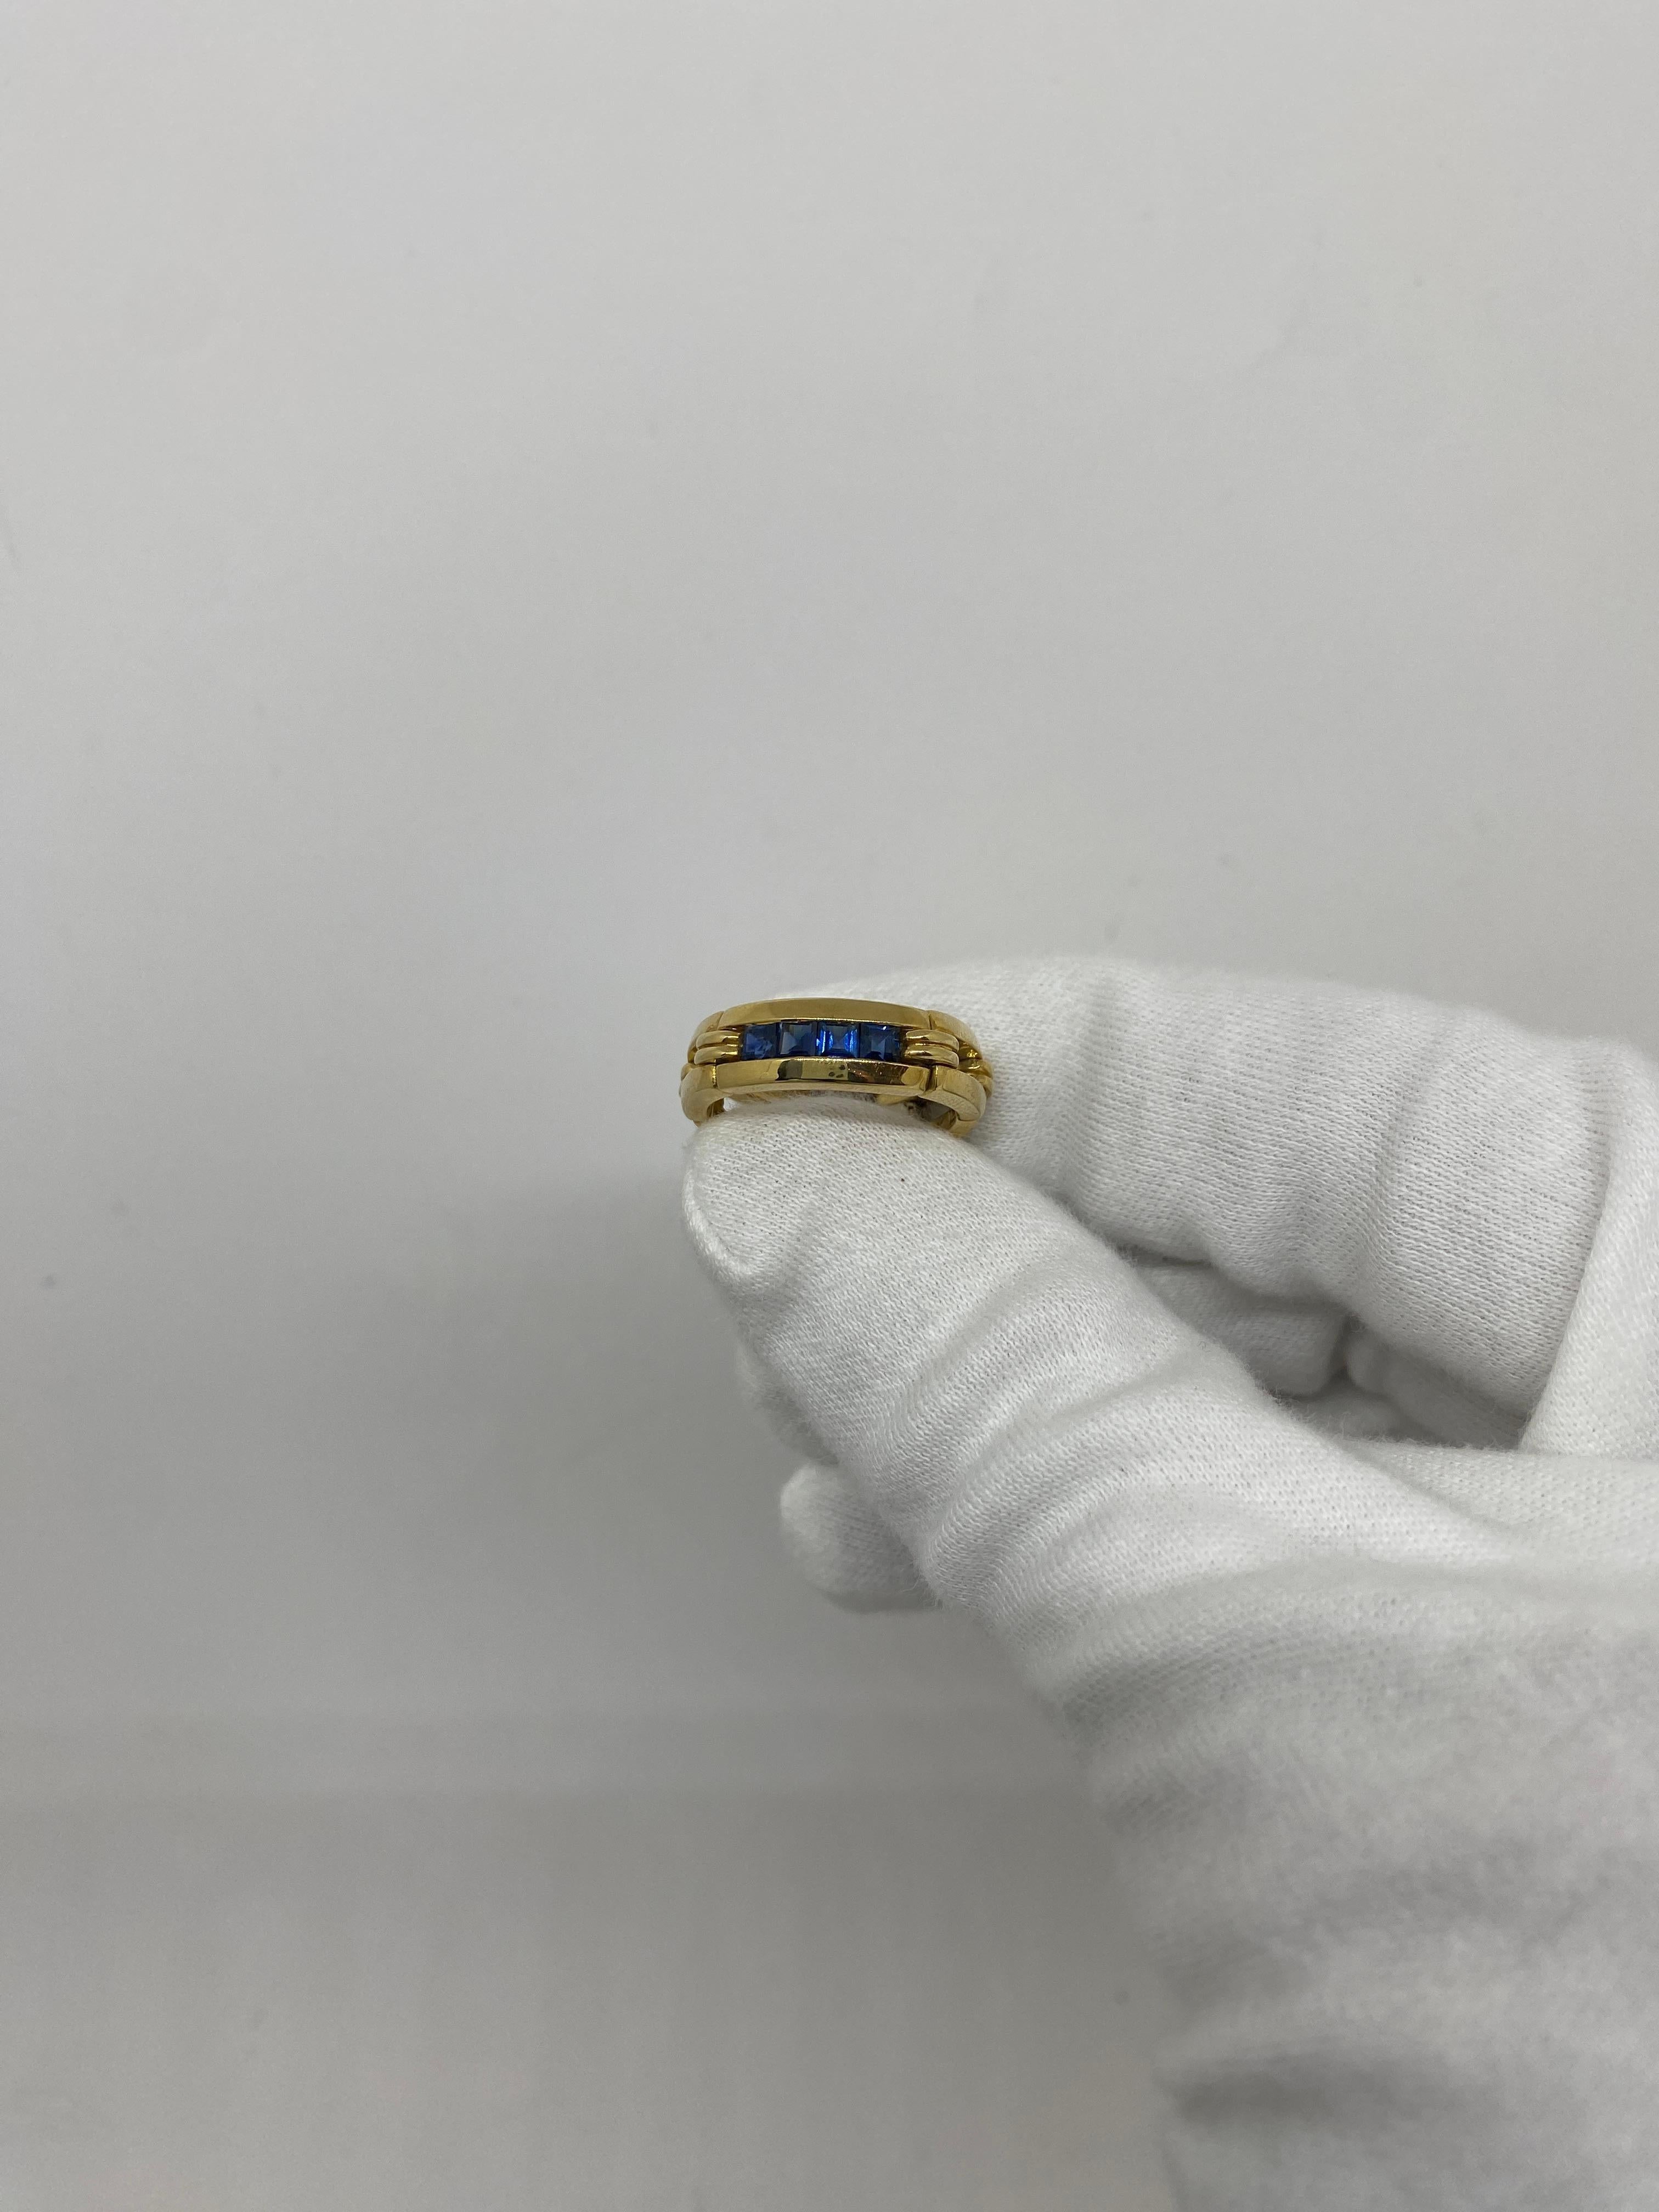 Ring made of 18kt yellow gold with natural blue carré - cut sapphires for ct .0.70

Welcome to our jewelry collection, where every piece tells a story of timeless elegance and unparalleled craftsmanship. As a family-run business in Italy for over